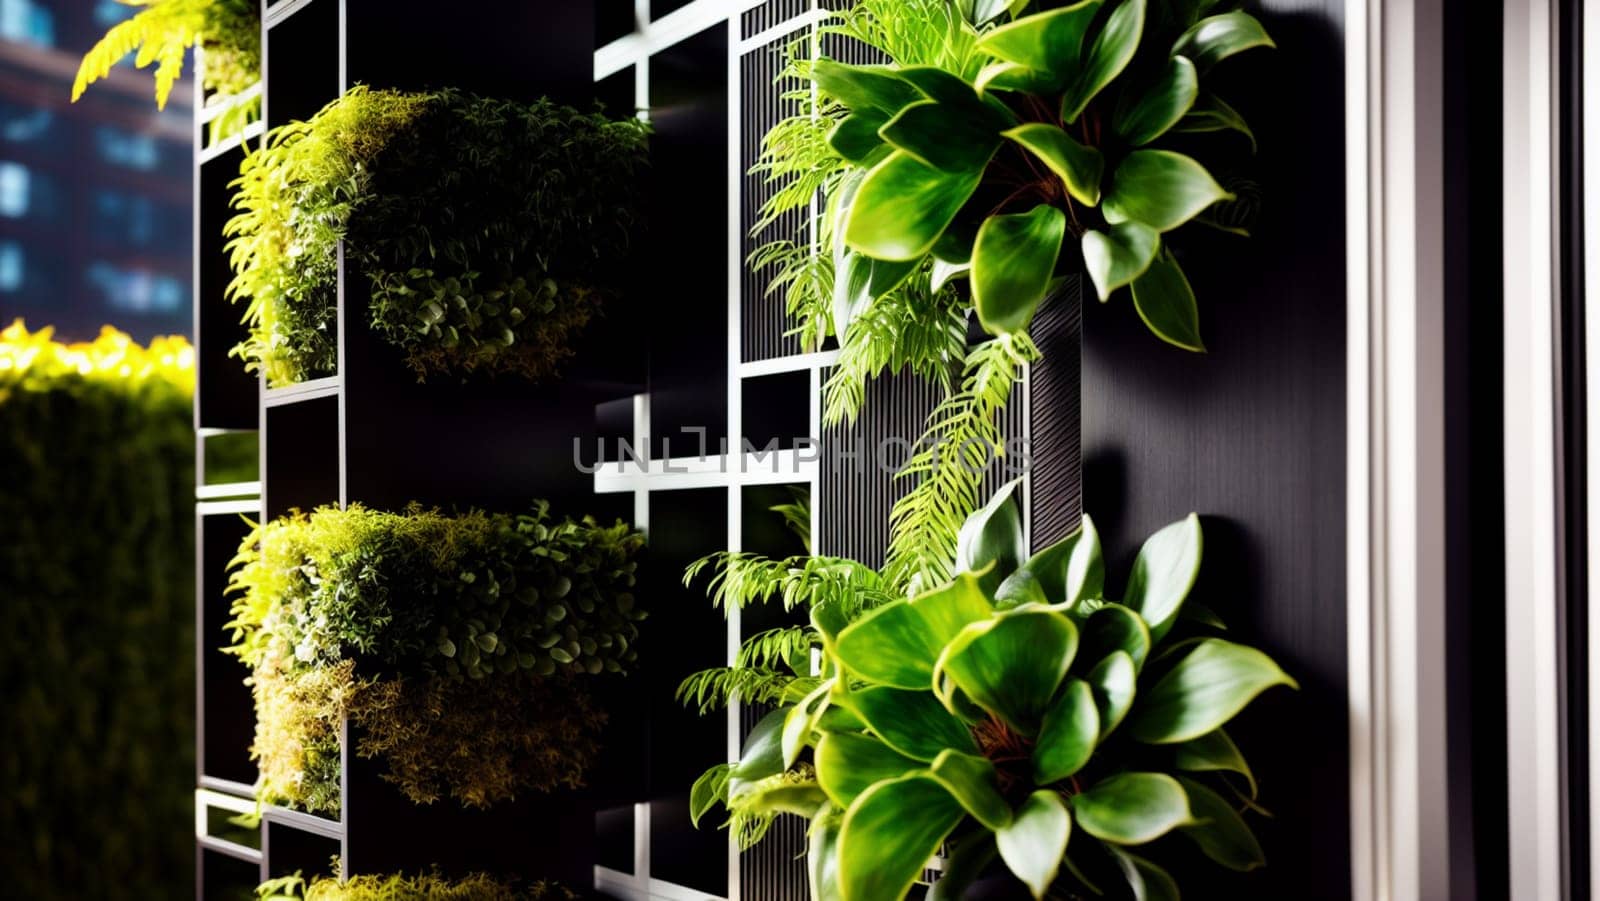 Beautiful and modern vertical garden with different types of plants in an ecological building. by XabiDonostia